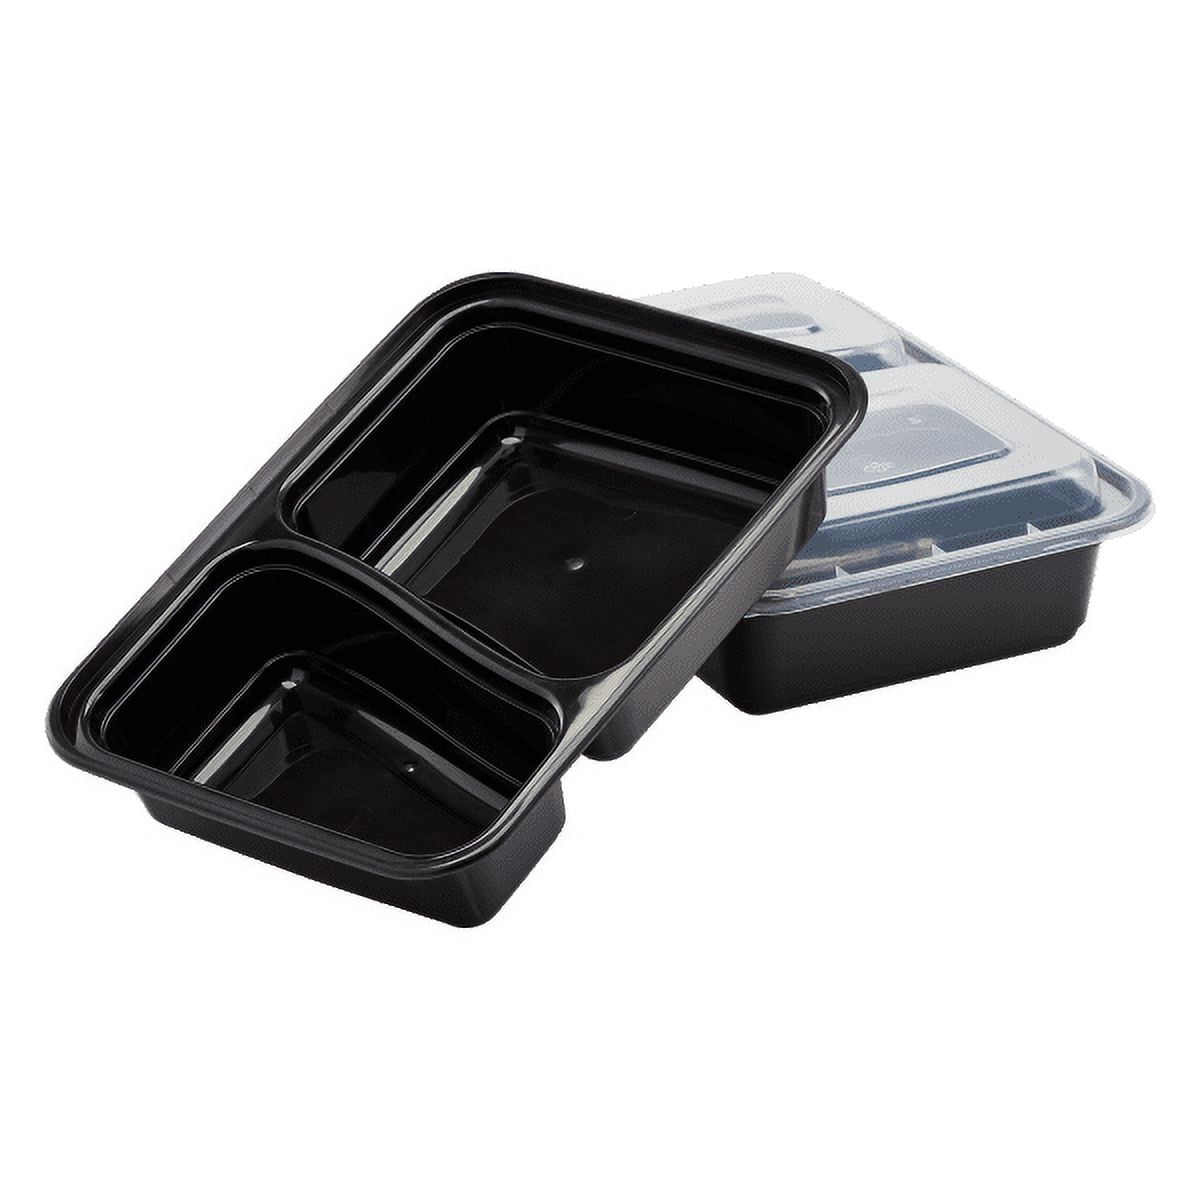 Thermoformer's Hot-to-Go Containers Enabled by Advanced PP Clarifier